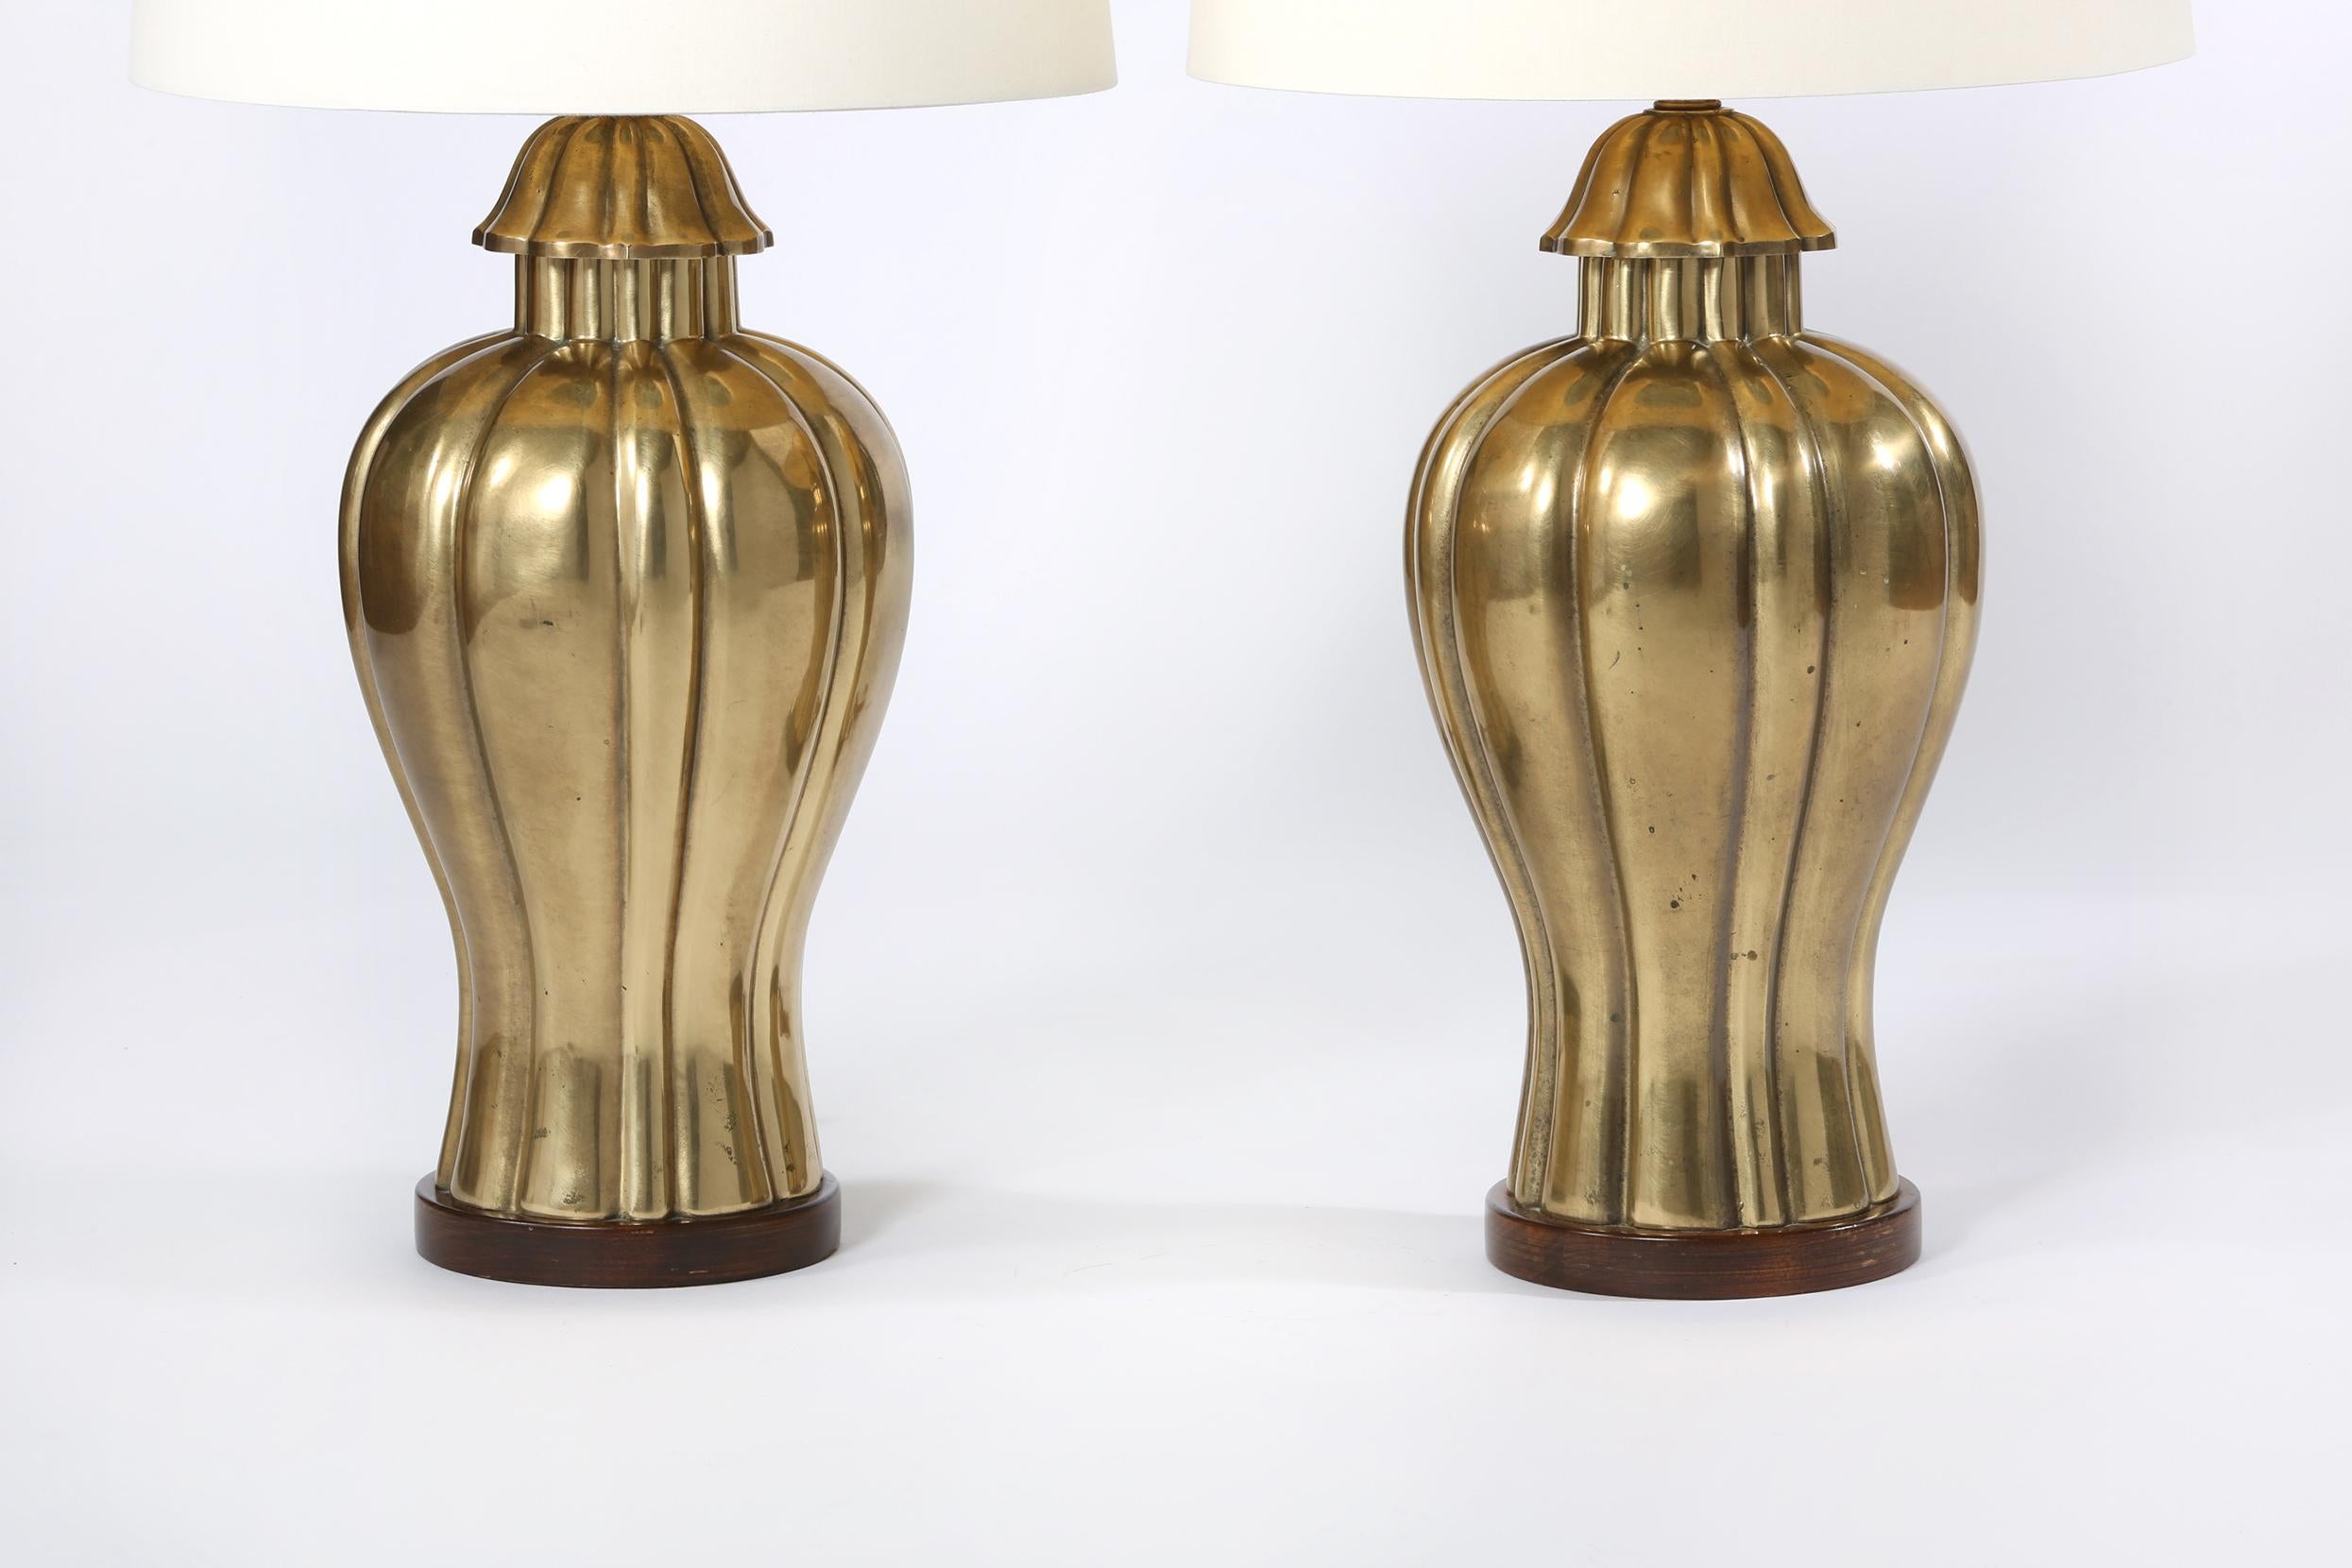 North American Mid-20th Century Brass Pair of Table Lamps / Wood Base